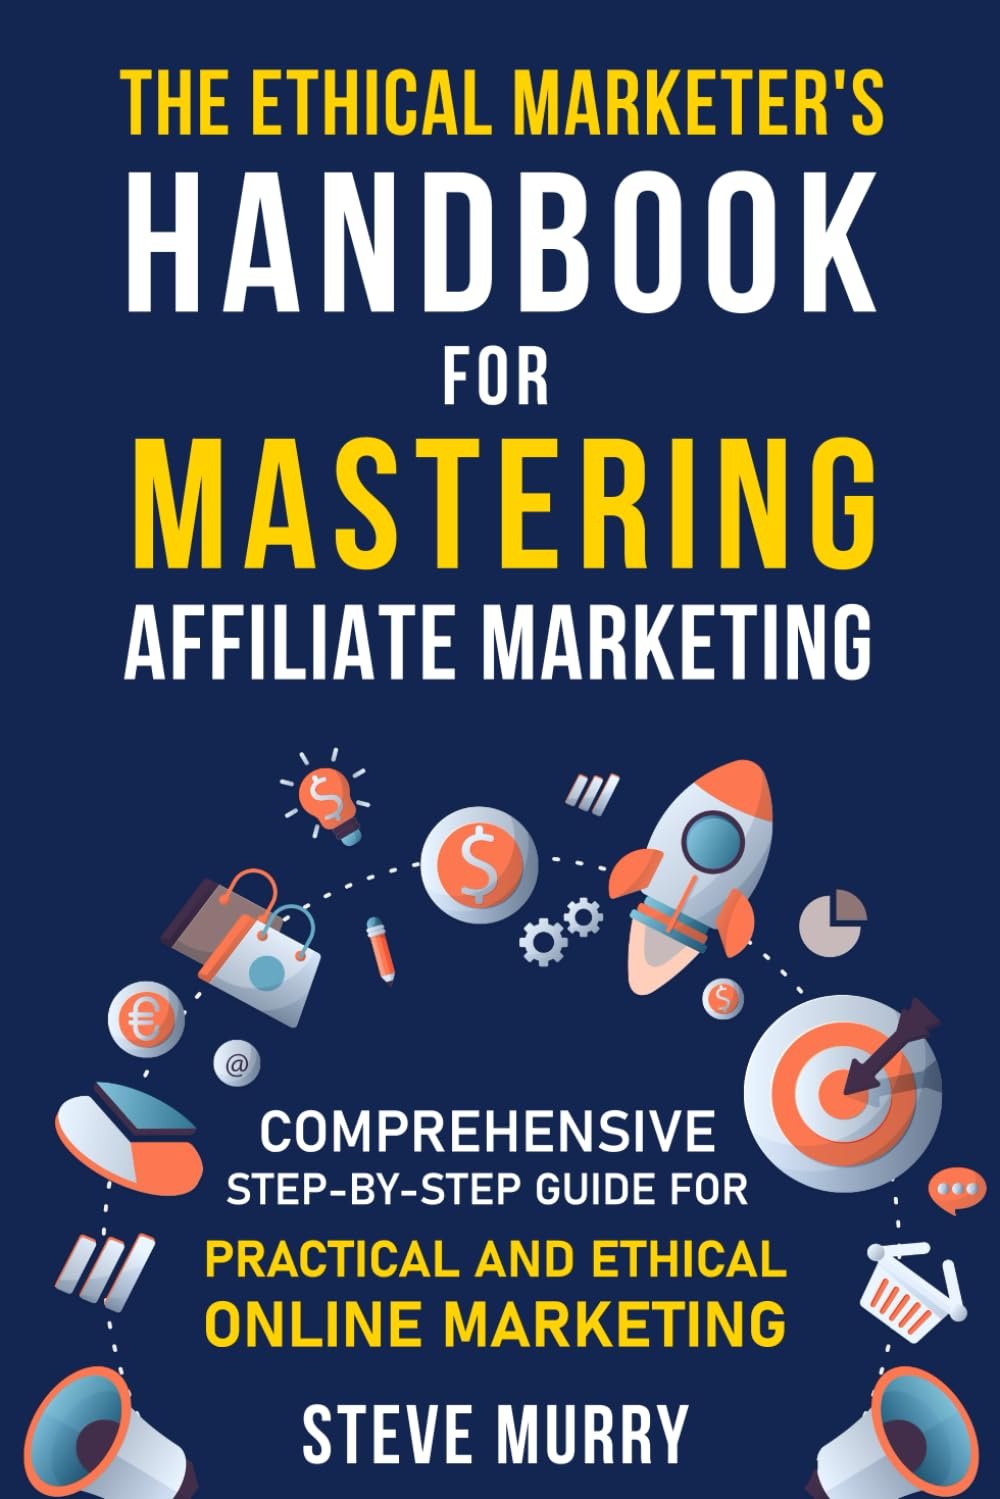 The Ethical Marketer’s Handbook Review